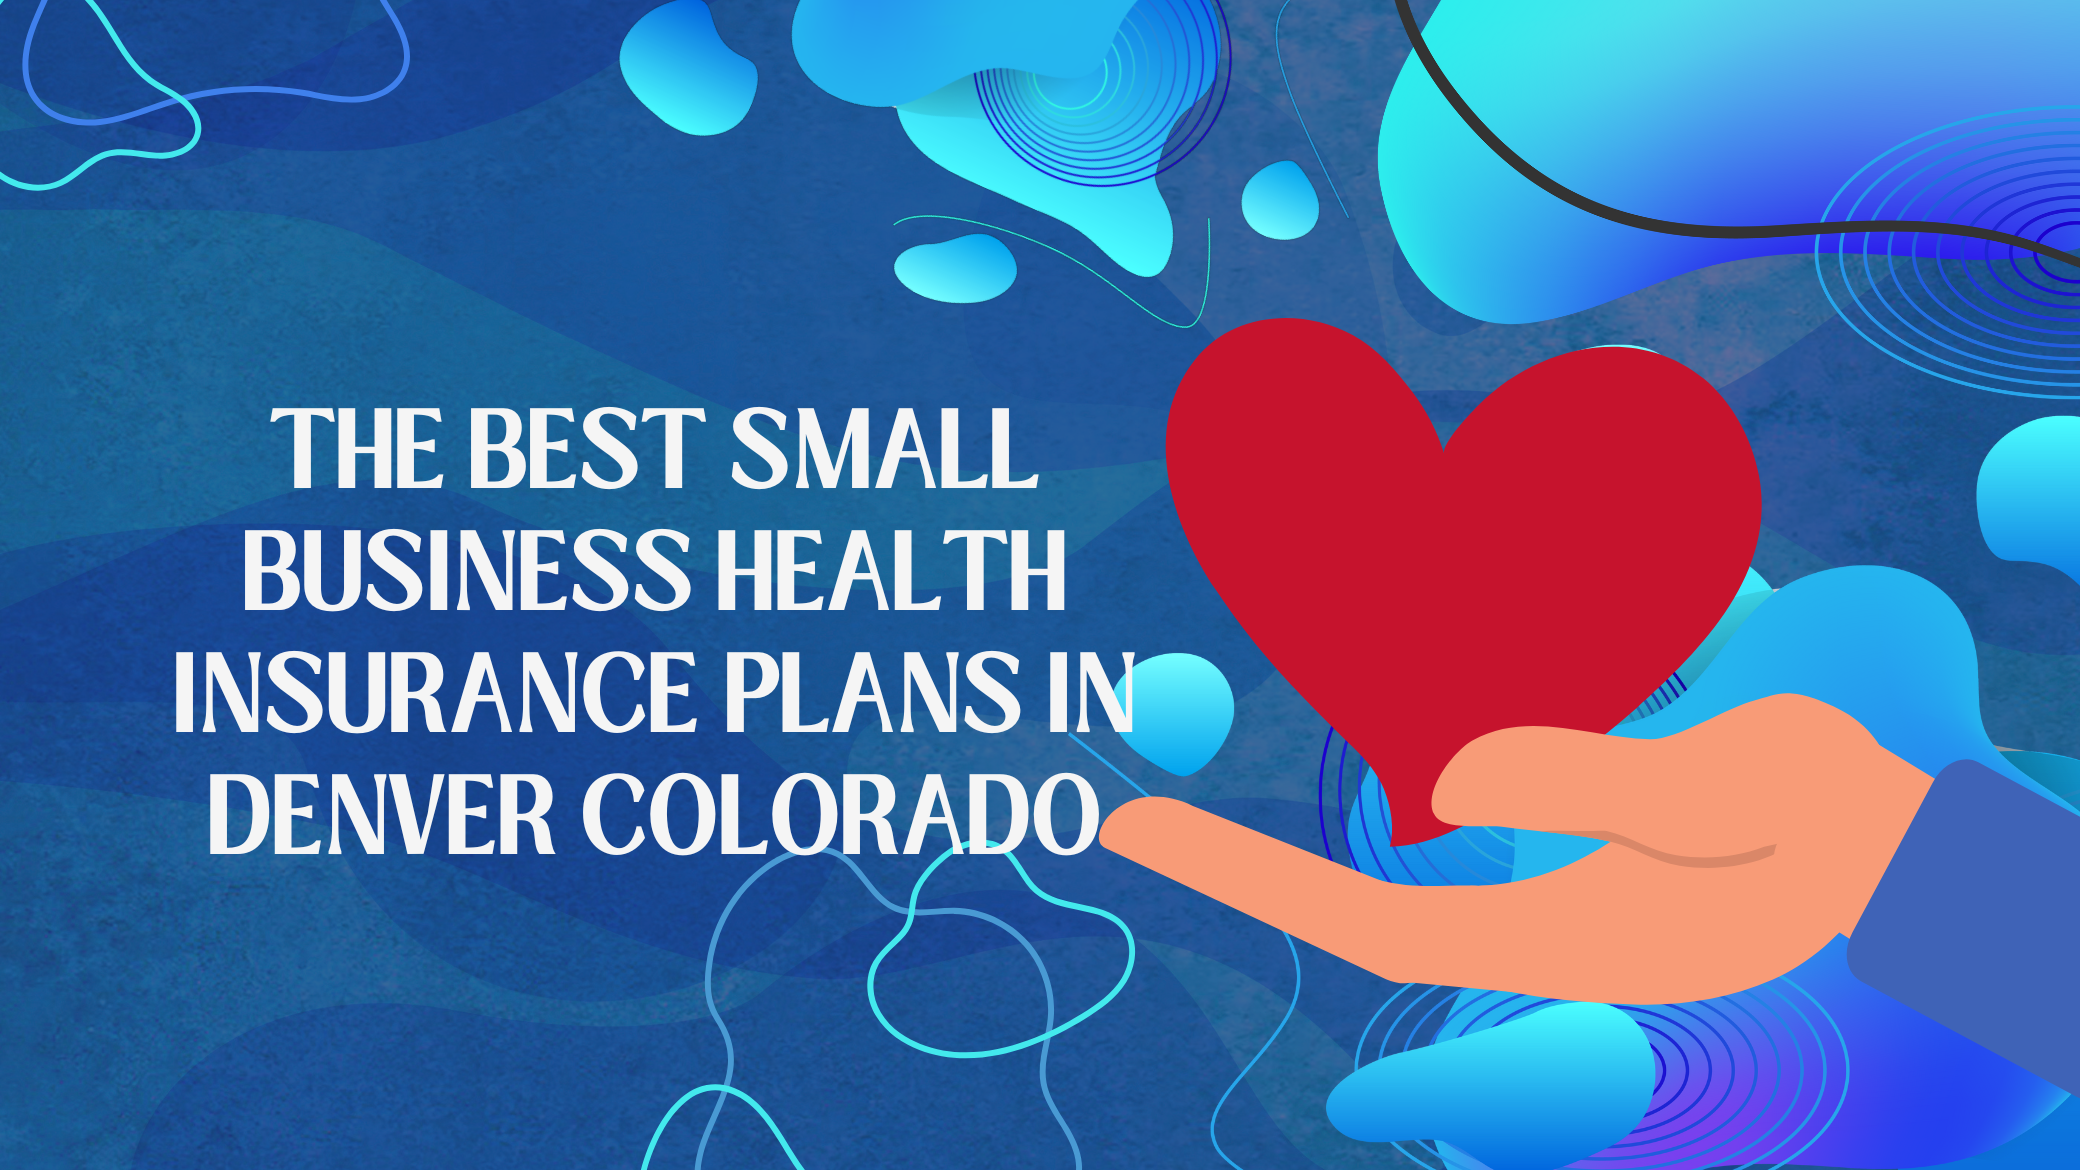 The Best Small Business Health Insurance Plans In Denver Colorado